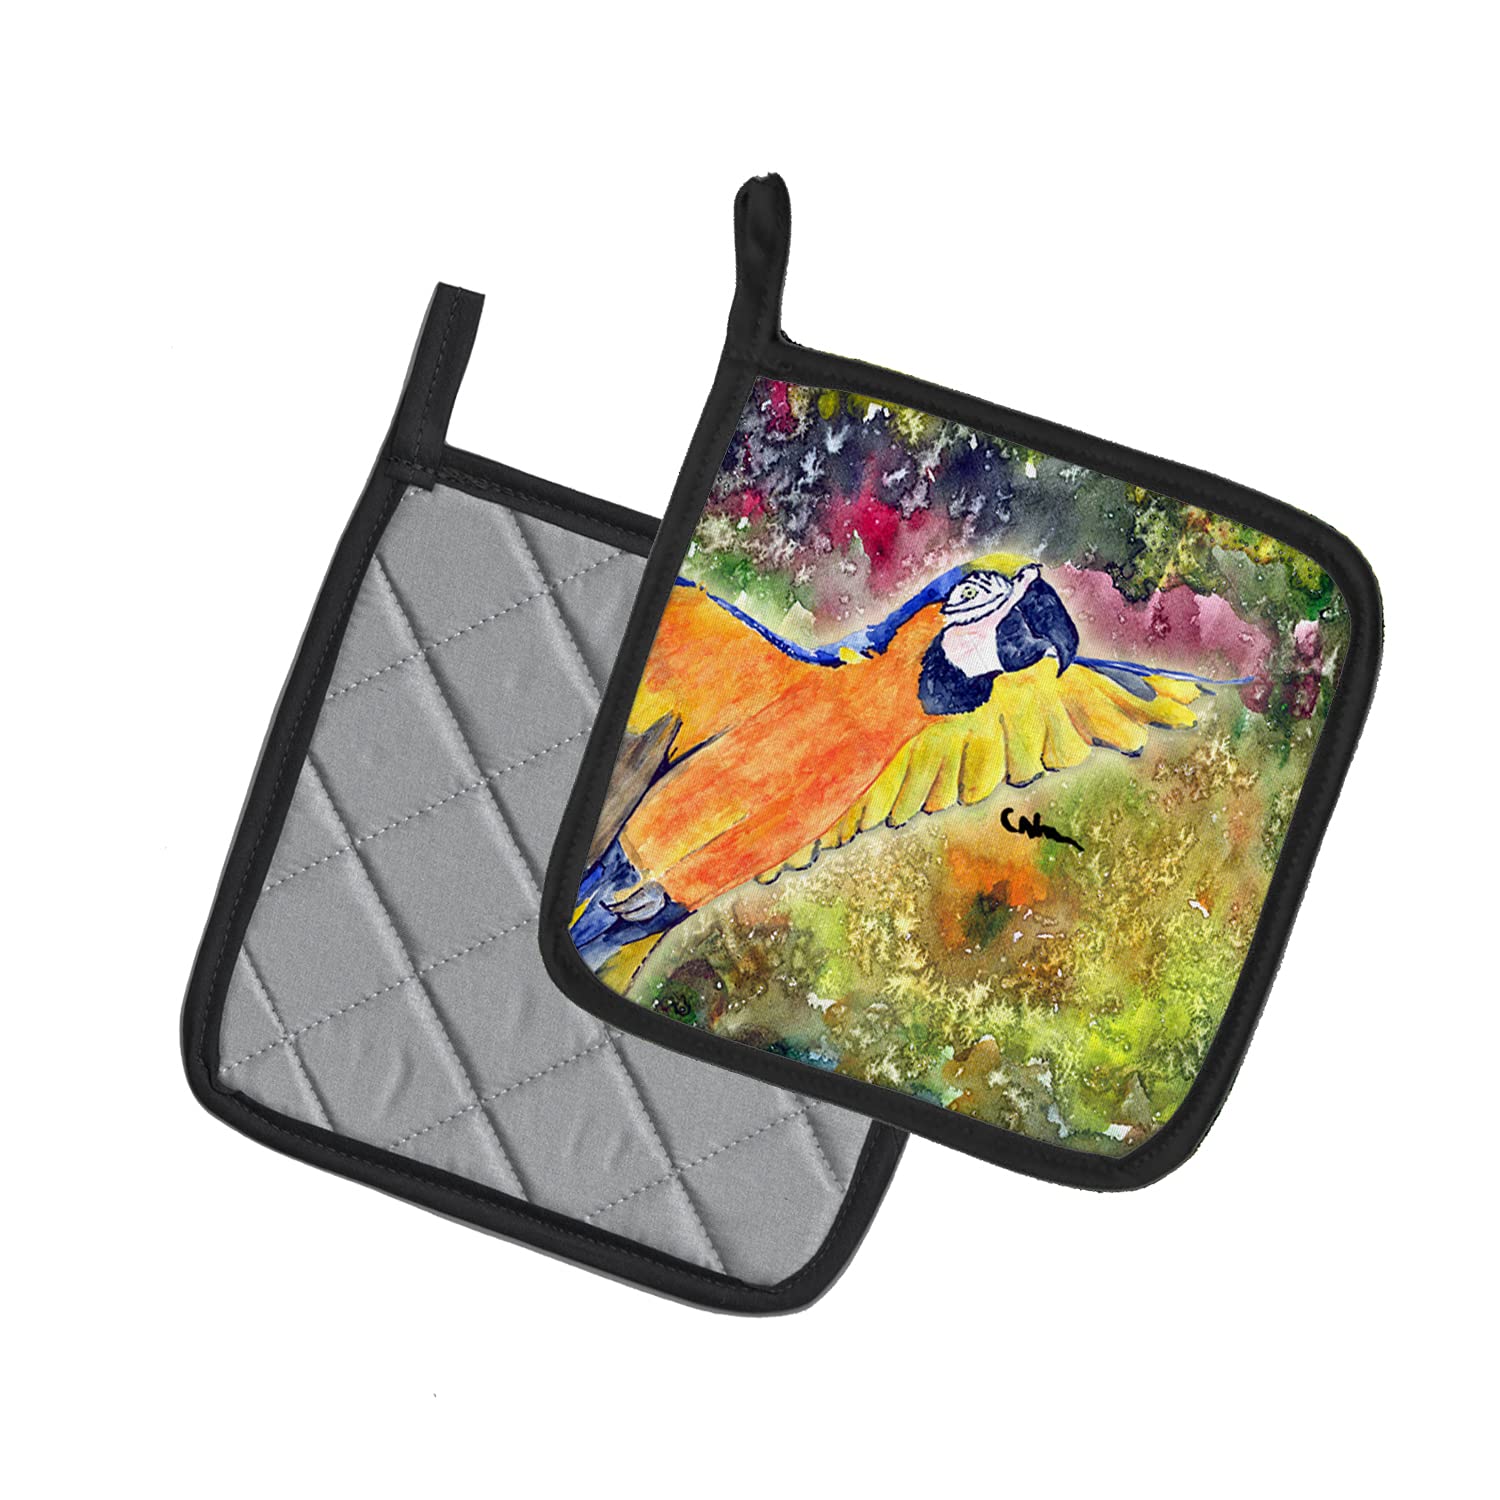 Caroline's Treasures 8602PTHD Parrot Parrot Head Pair of Pot Holders Kitchen Heat Resistant Pot Holders Sets Oven Hot Pads for Cooking Baking BBQ, 7 1/2 x 7 1/2